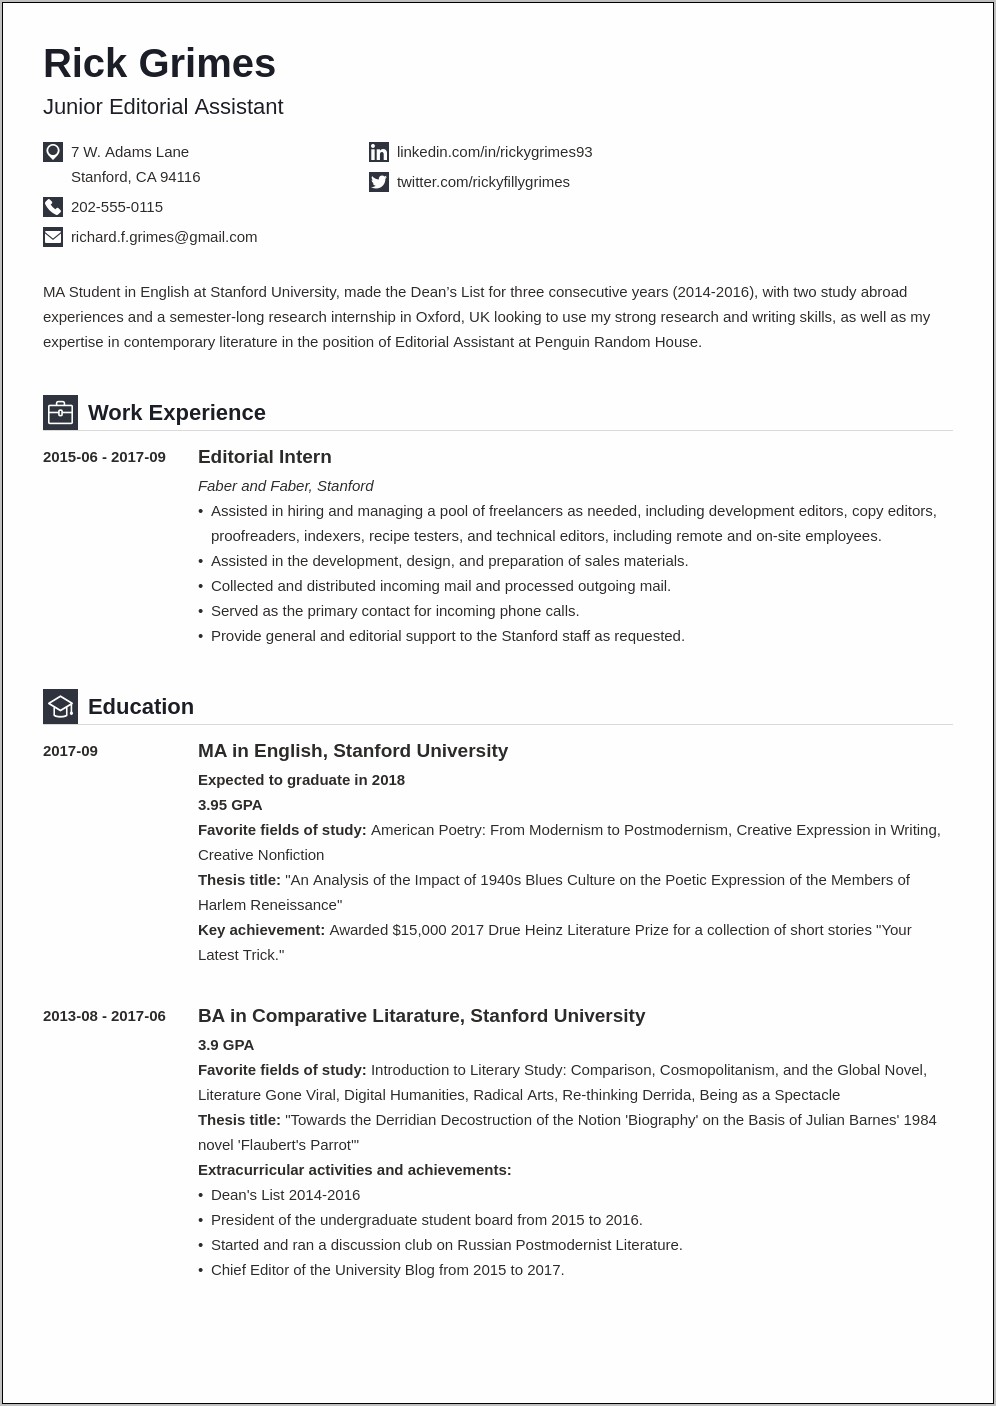 Resume Template For University On Campus Job